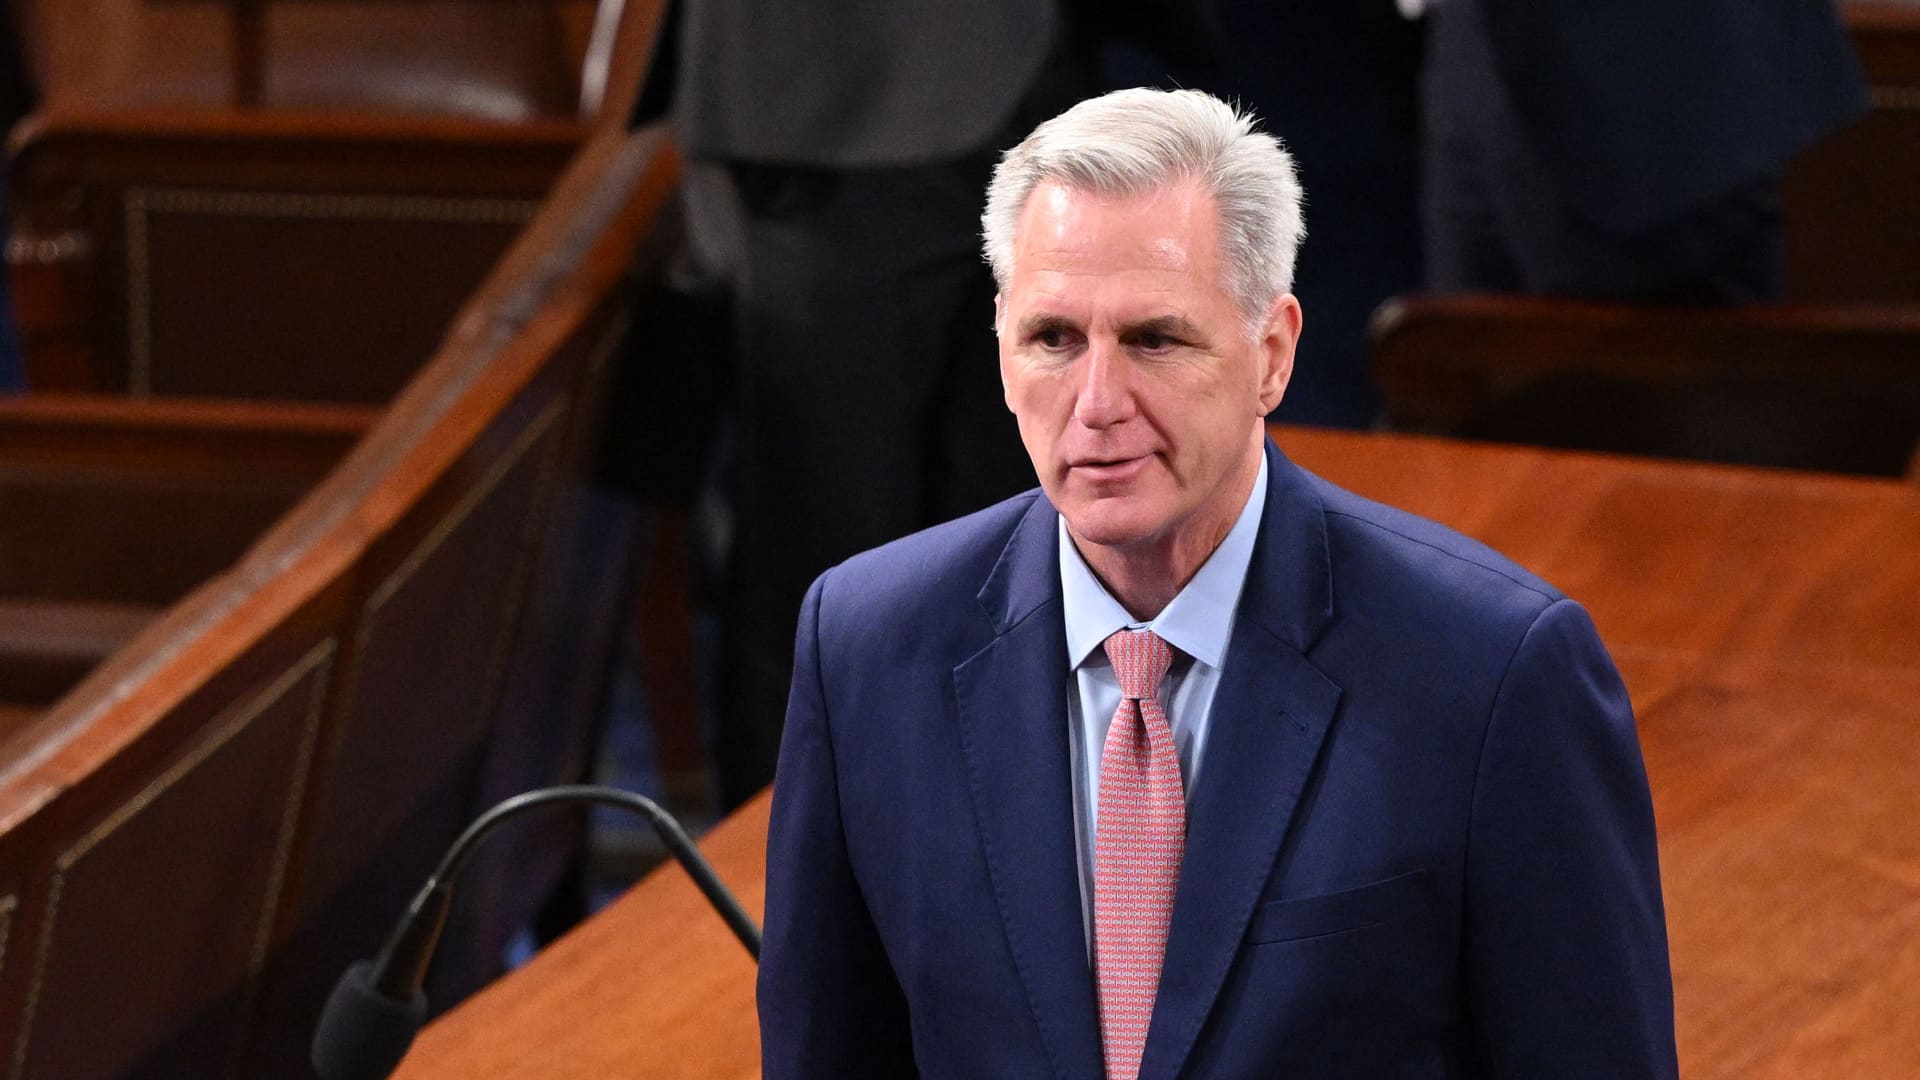 House Minority Leader Kevin McCarthy (R-CA) is seen at the US Capitol in Washington, DC on December 21, 2022.